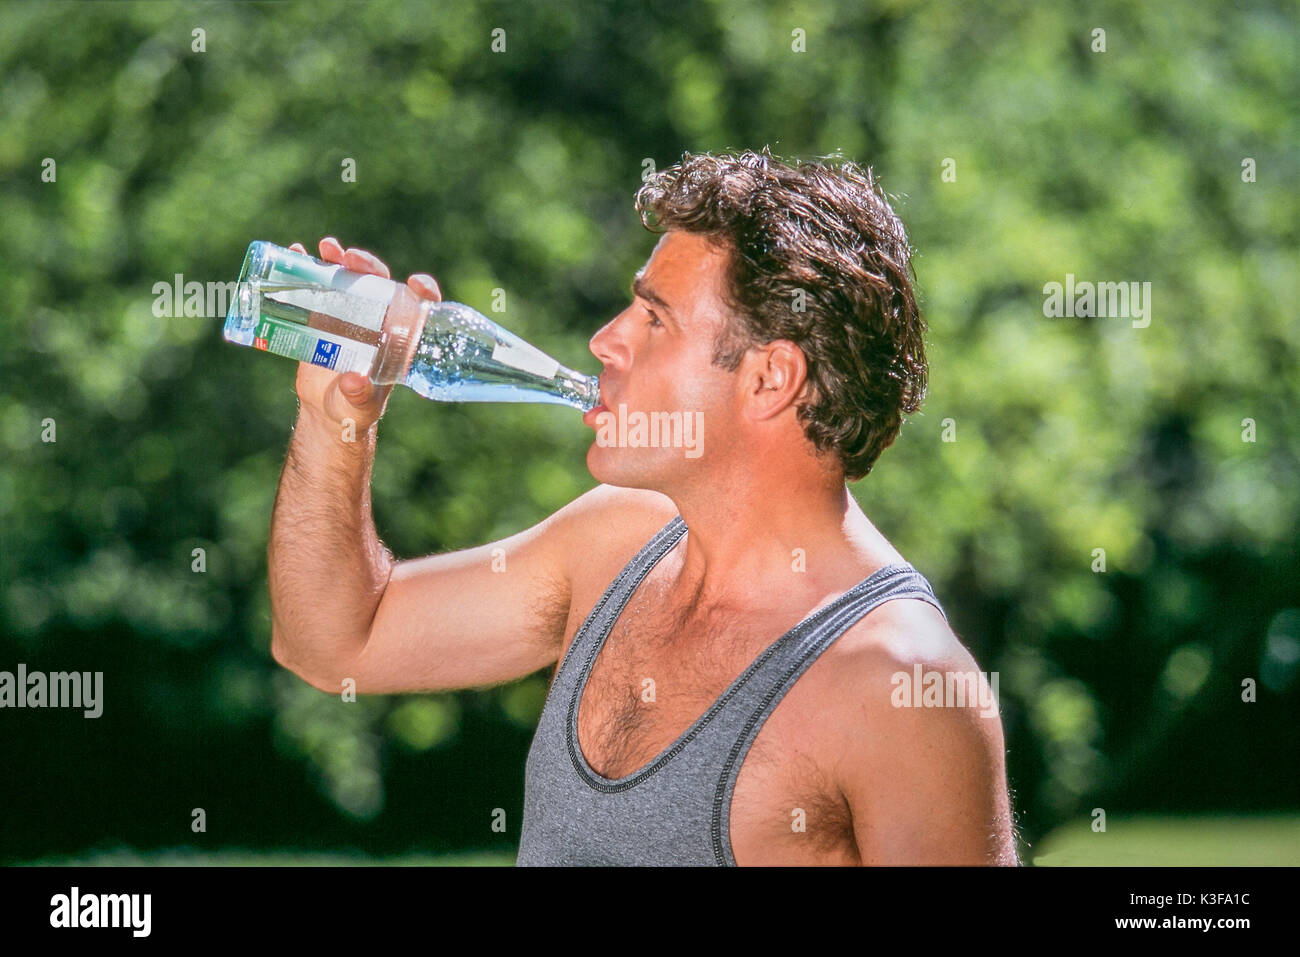 Man at the sports outfit drinks water from bottle Stock Photo